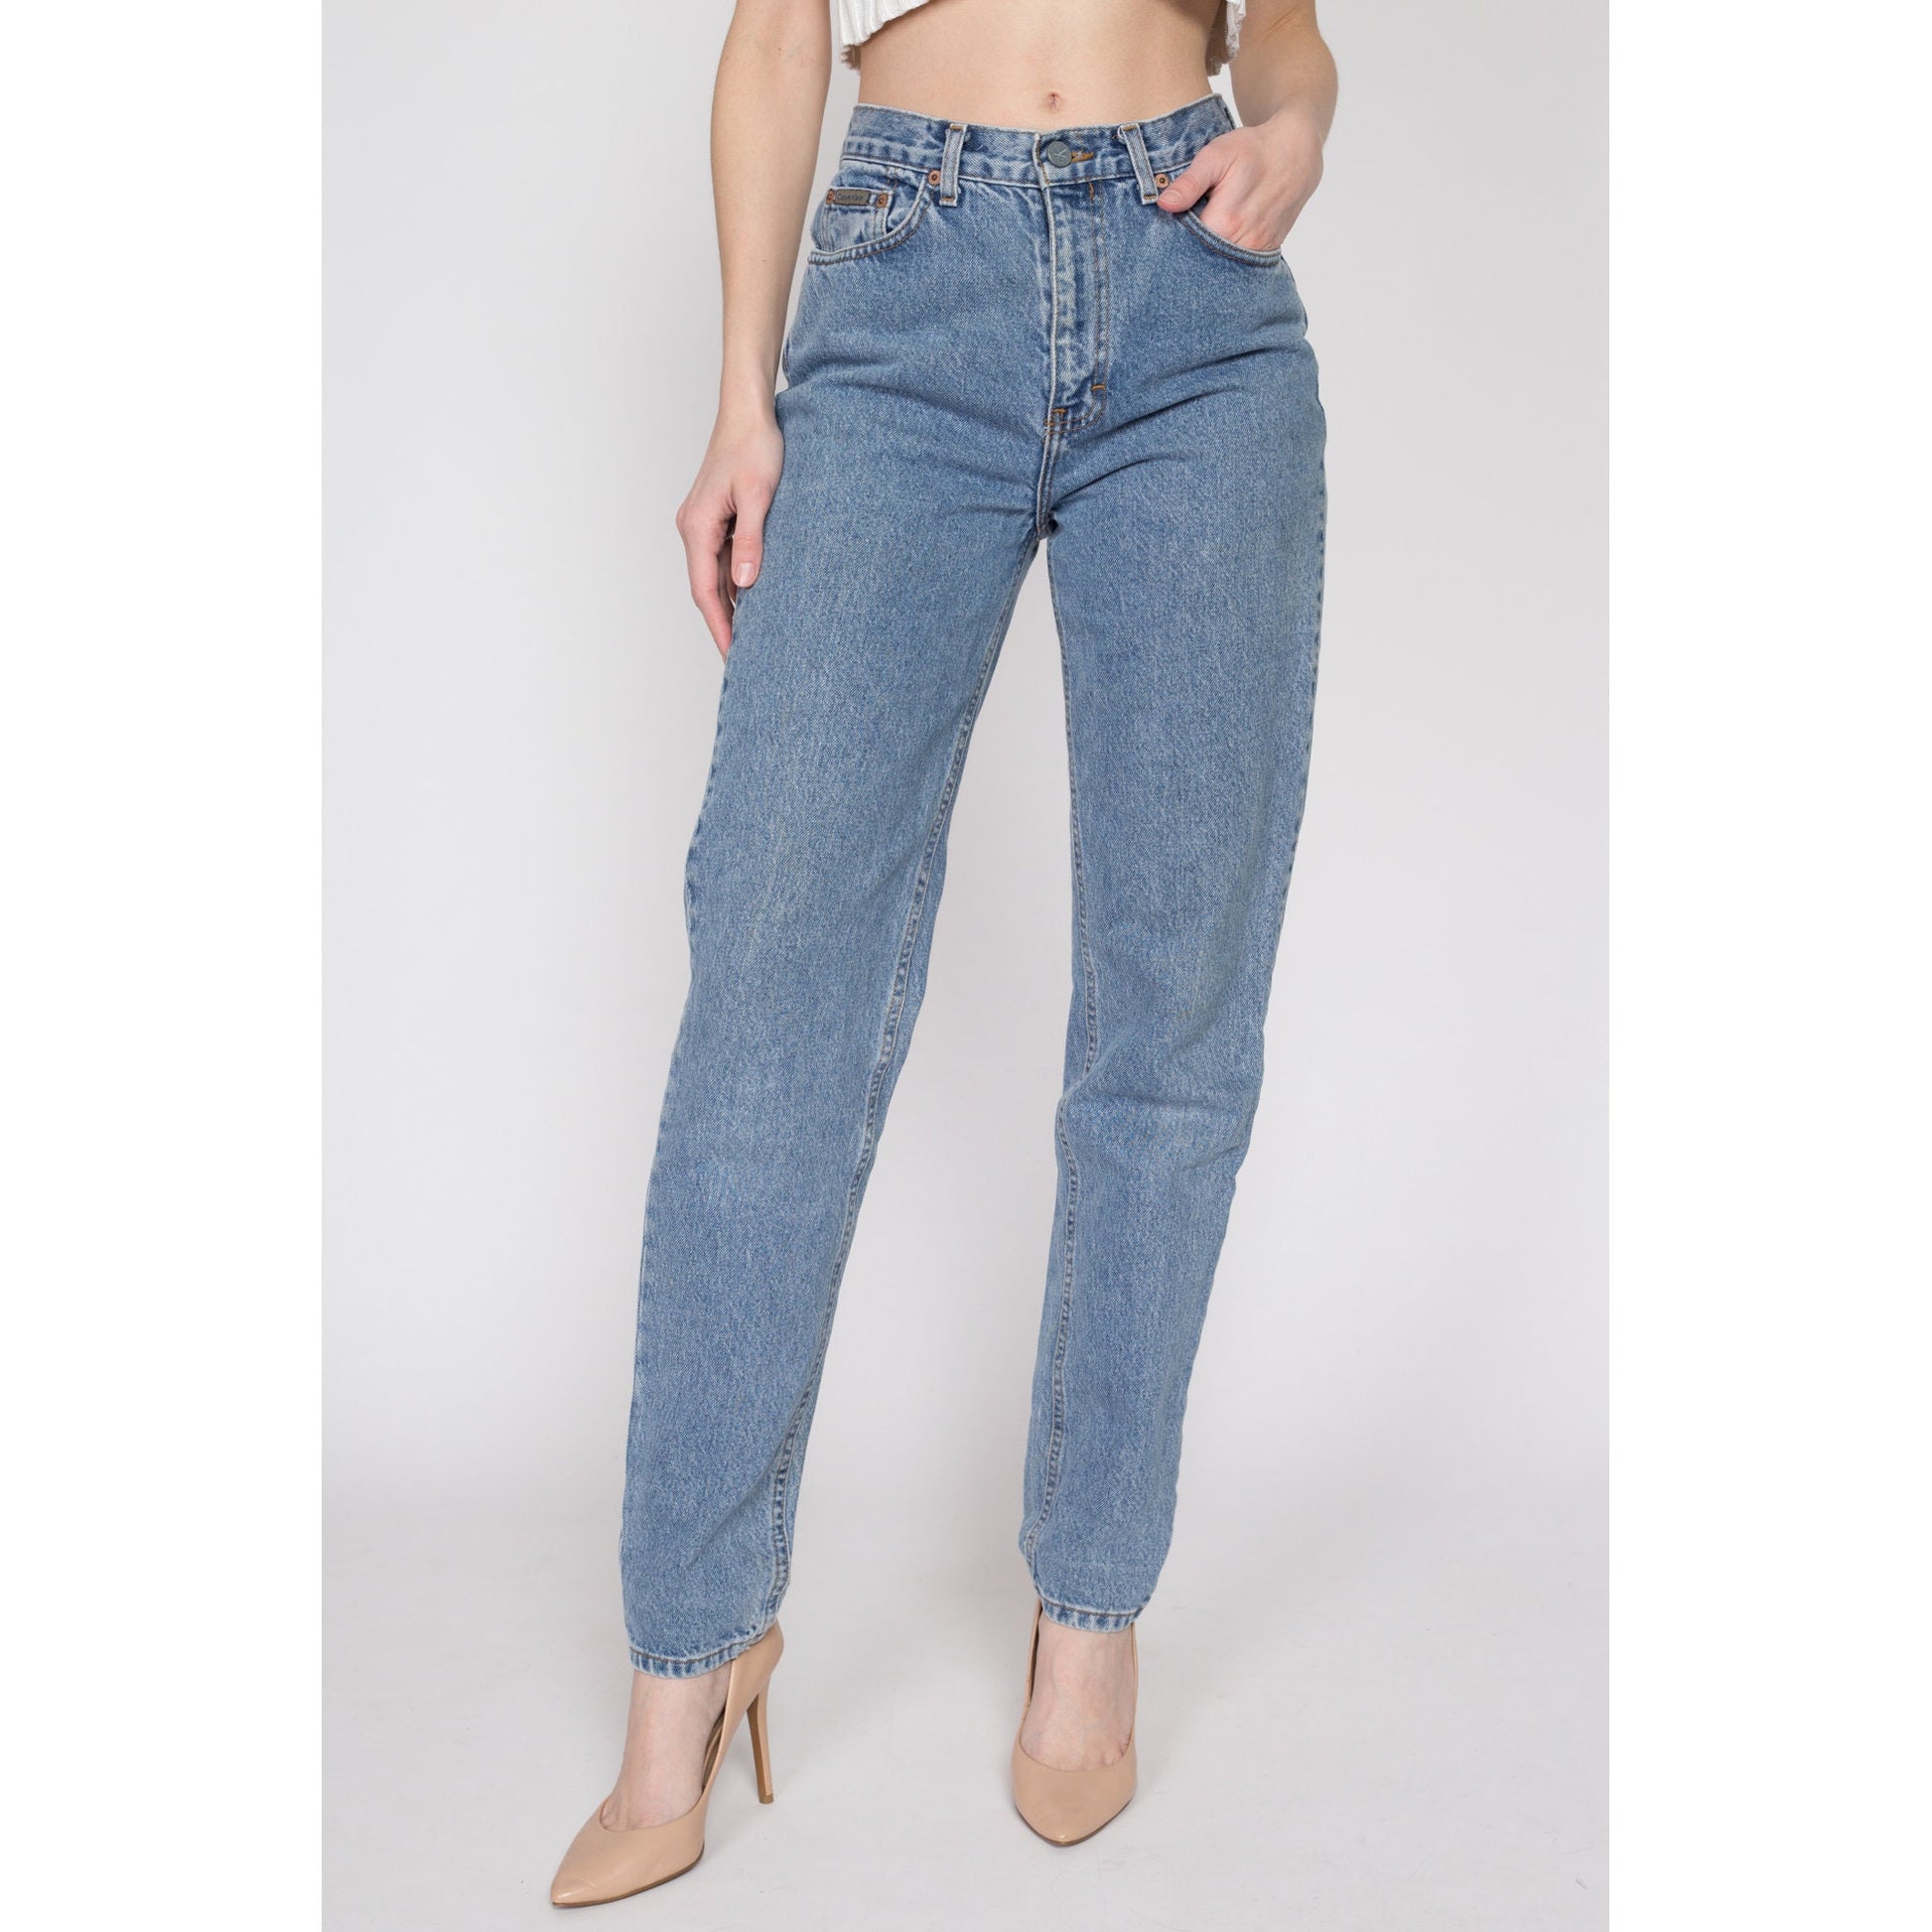 Small 90s Calvin Klein High Waisted Mom Jeans 27 – Flying Apple